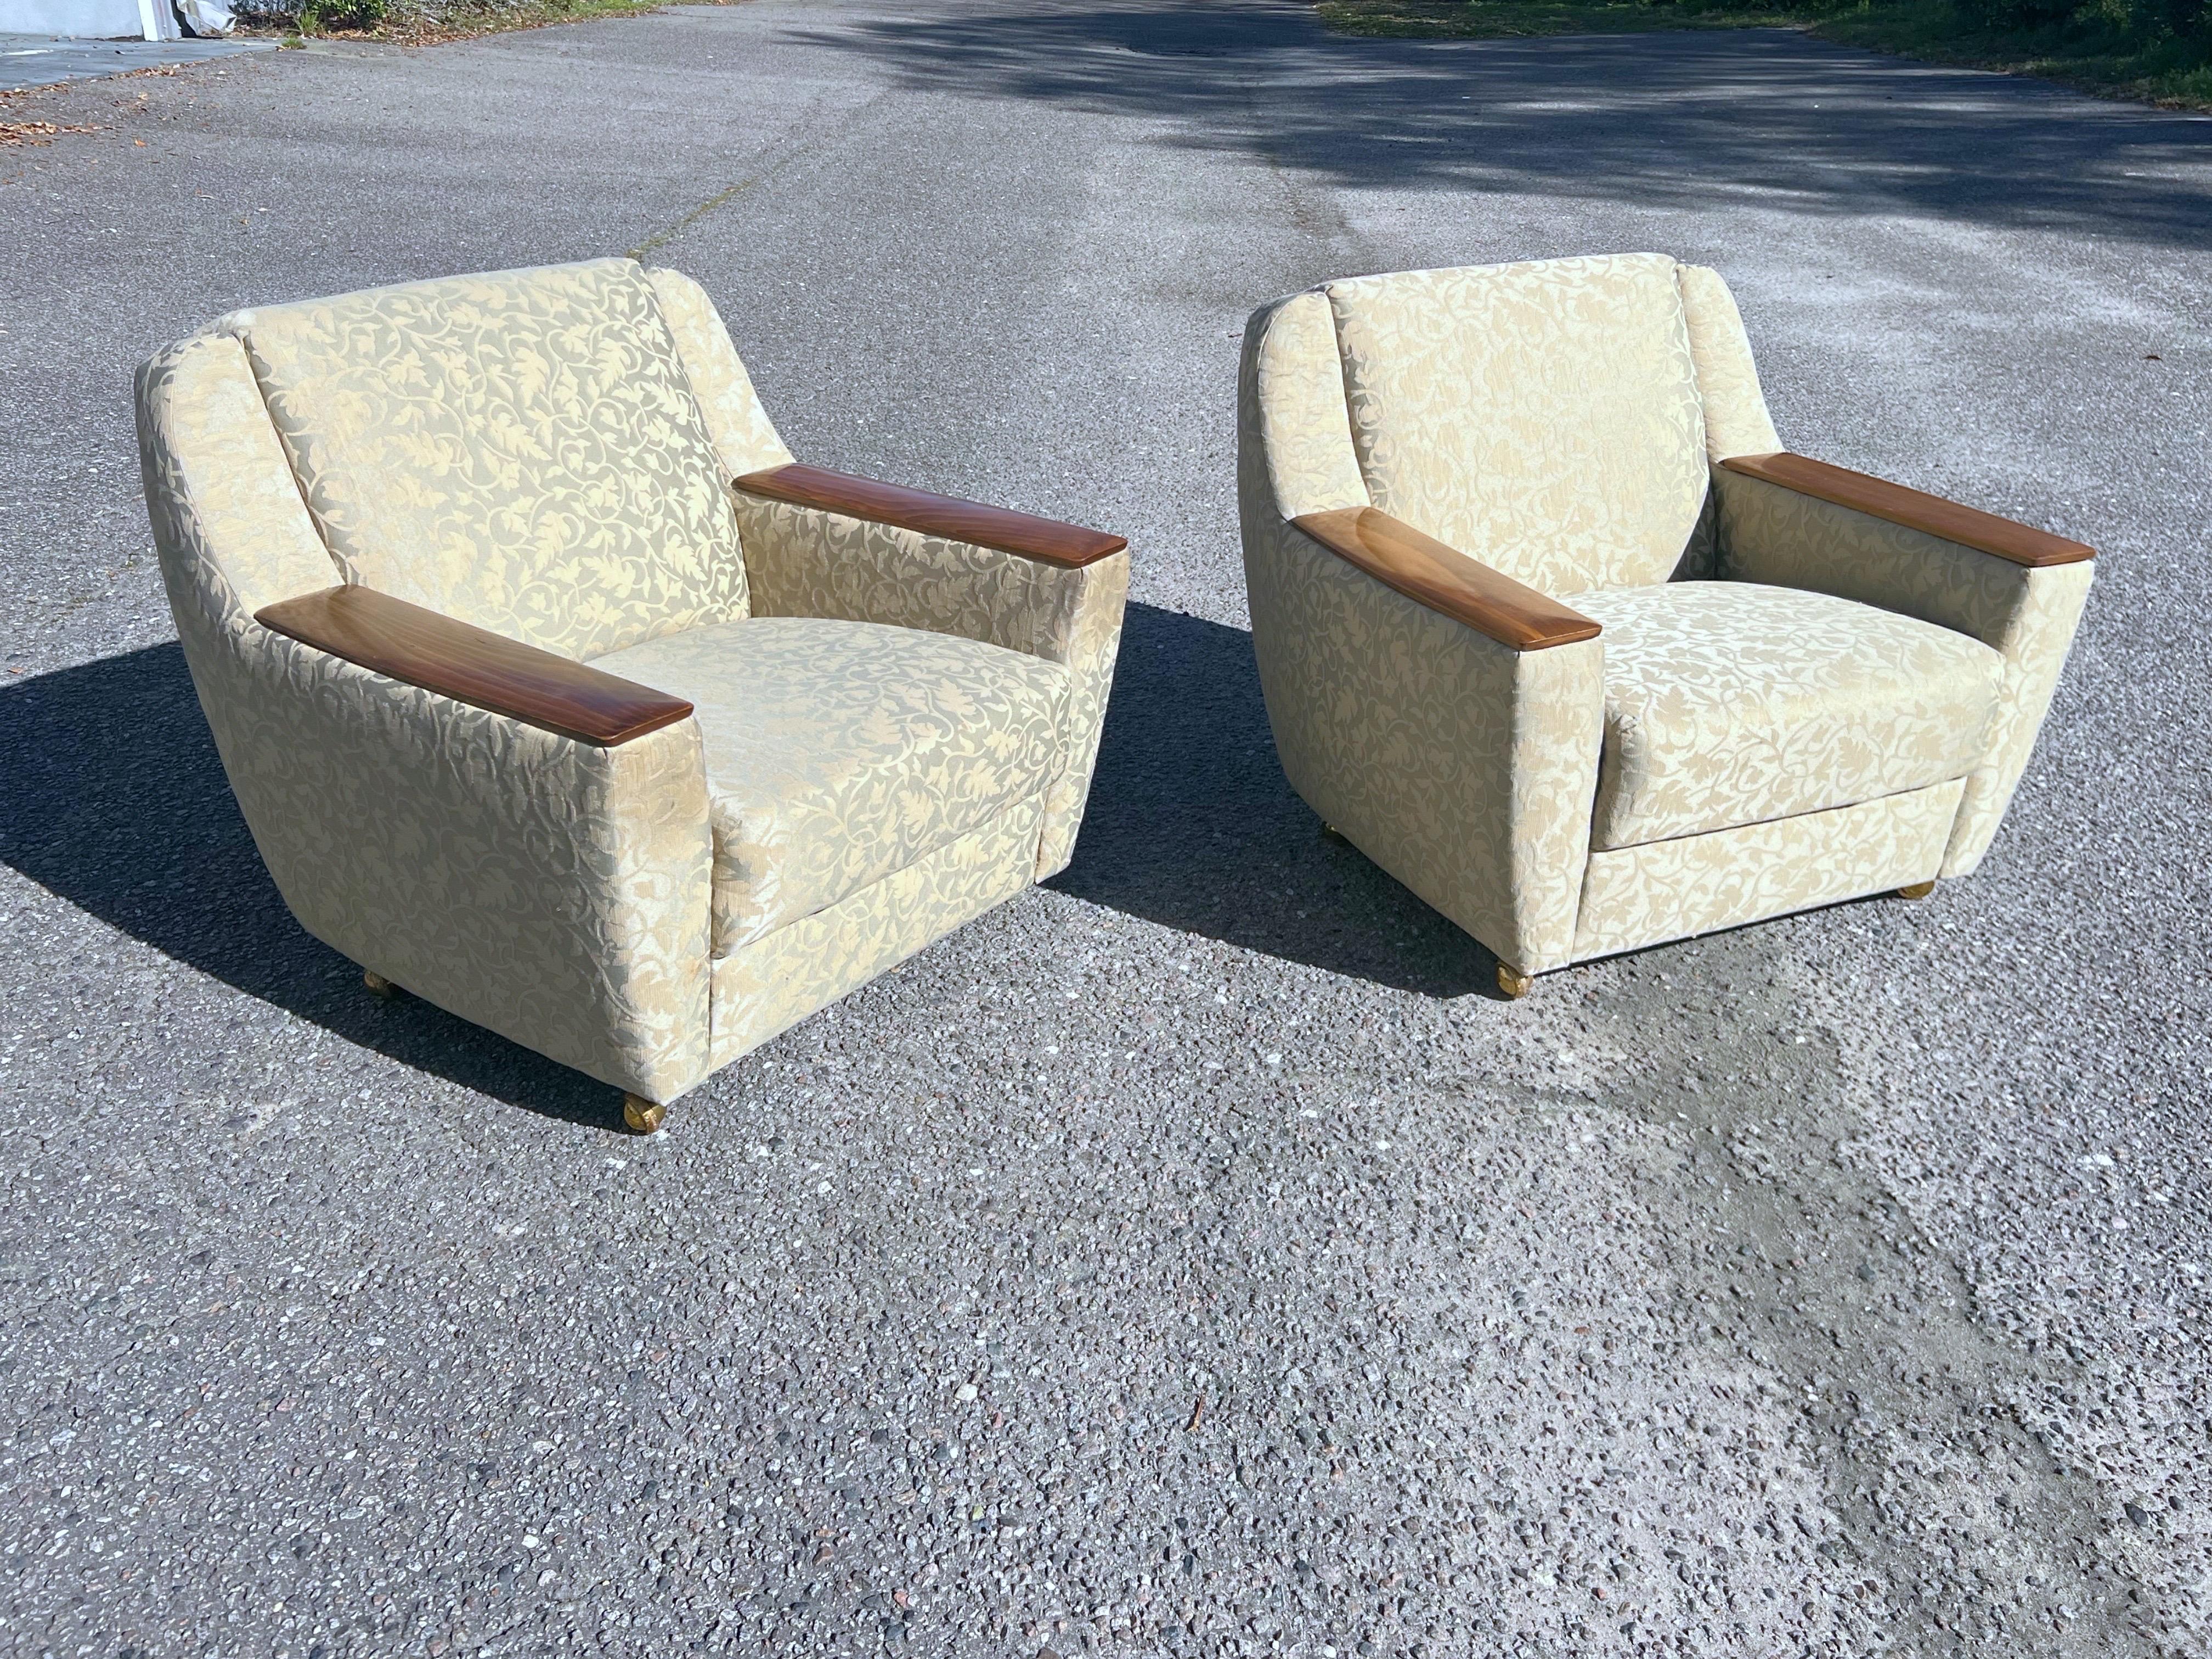 1950’s Swedish Modern Club Chairs With Wooden Arm Rests on Castors - a Pair For Sale 6